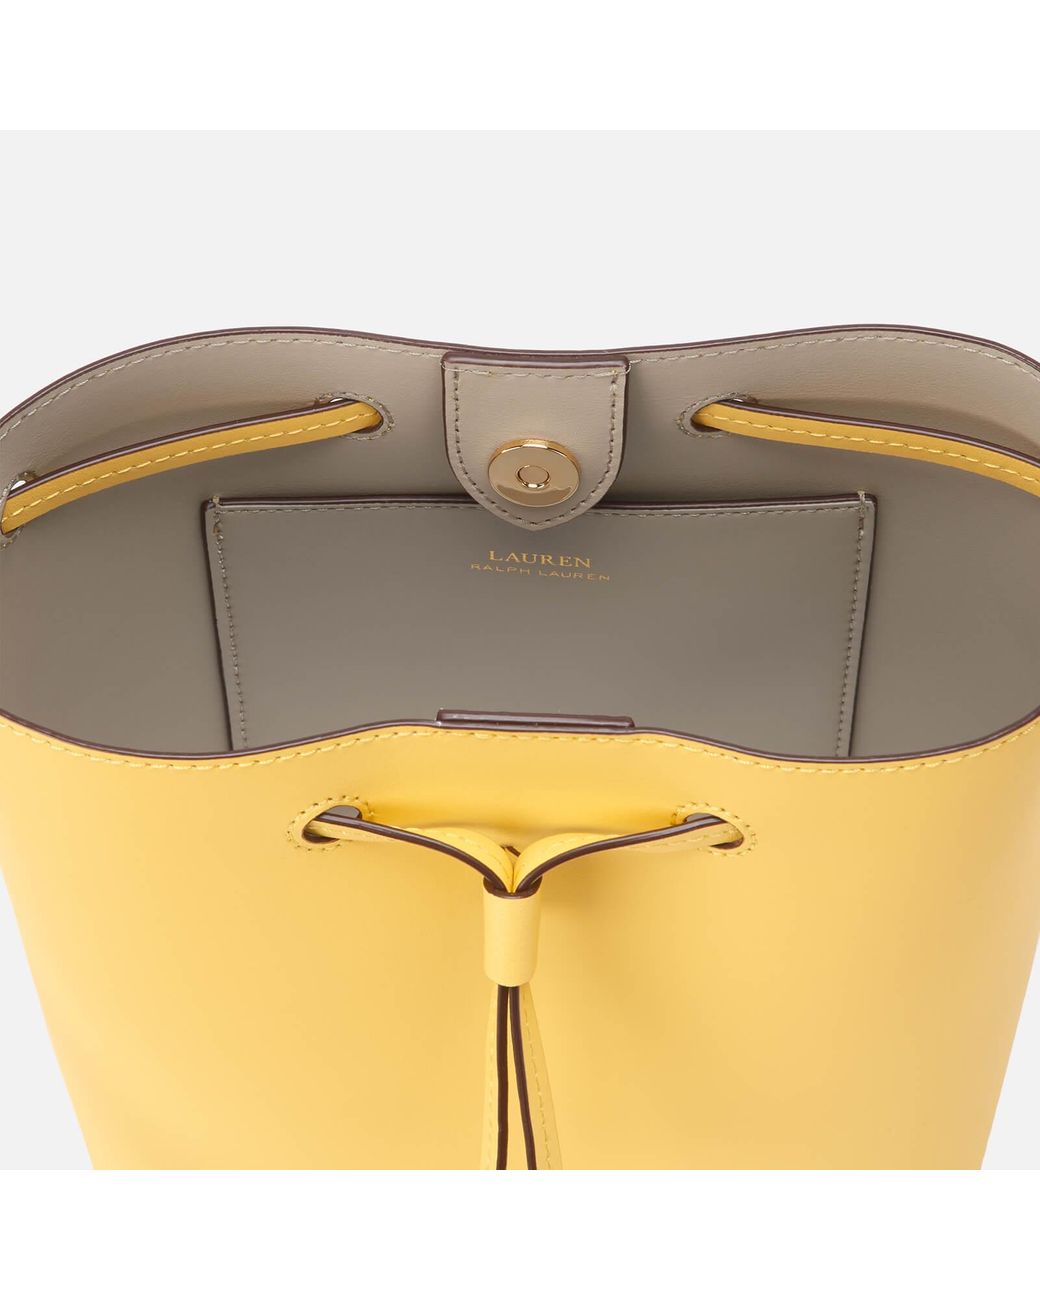 Lauren by Ralph Lauren Super Smooth Leather Debby Drawstring Bag in Yellow  | Lyst